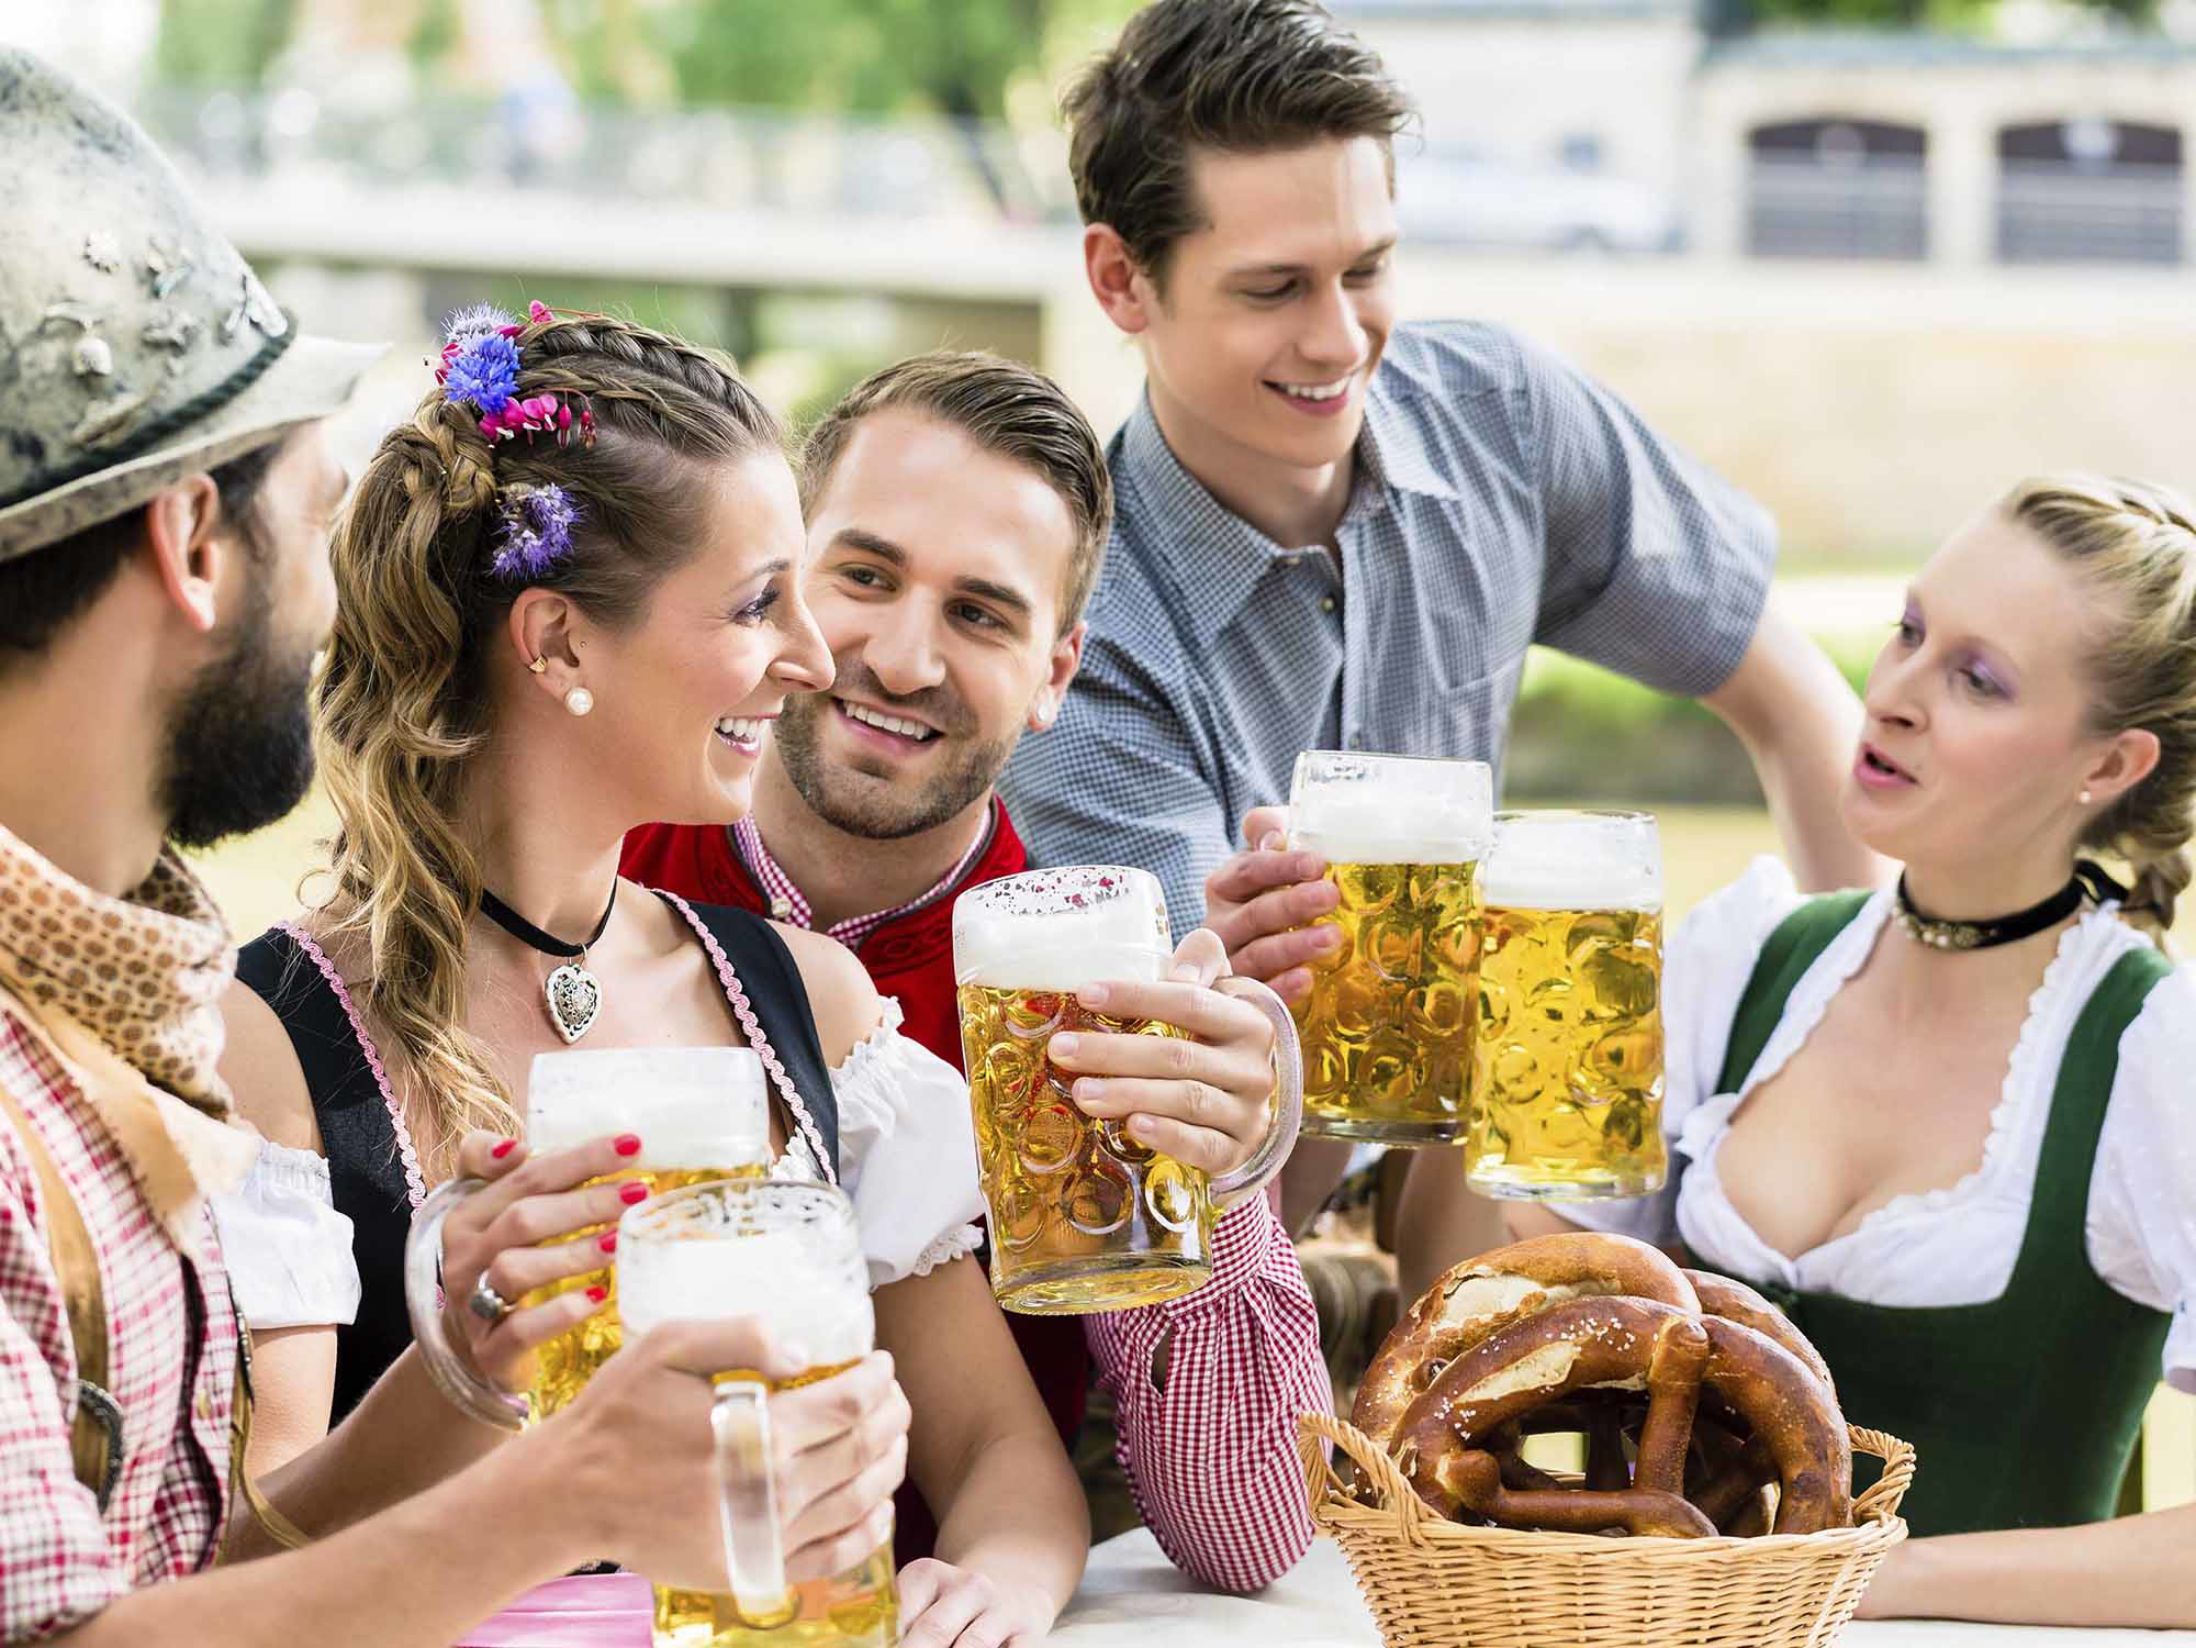 Manchester Events to Know About - Oktoberfest